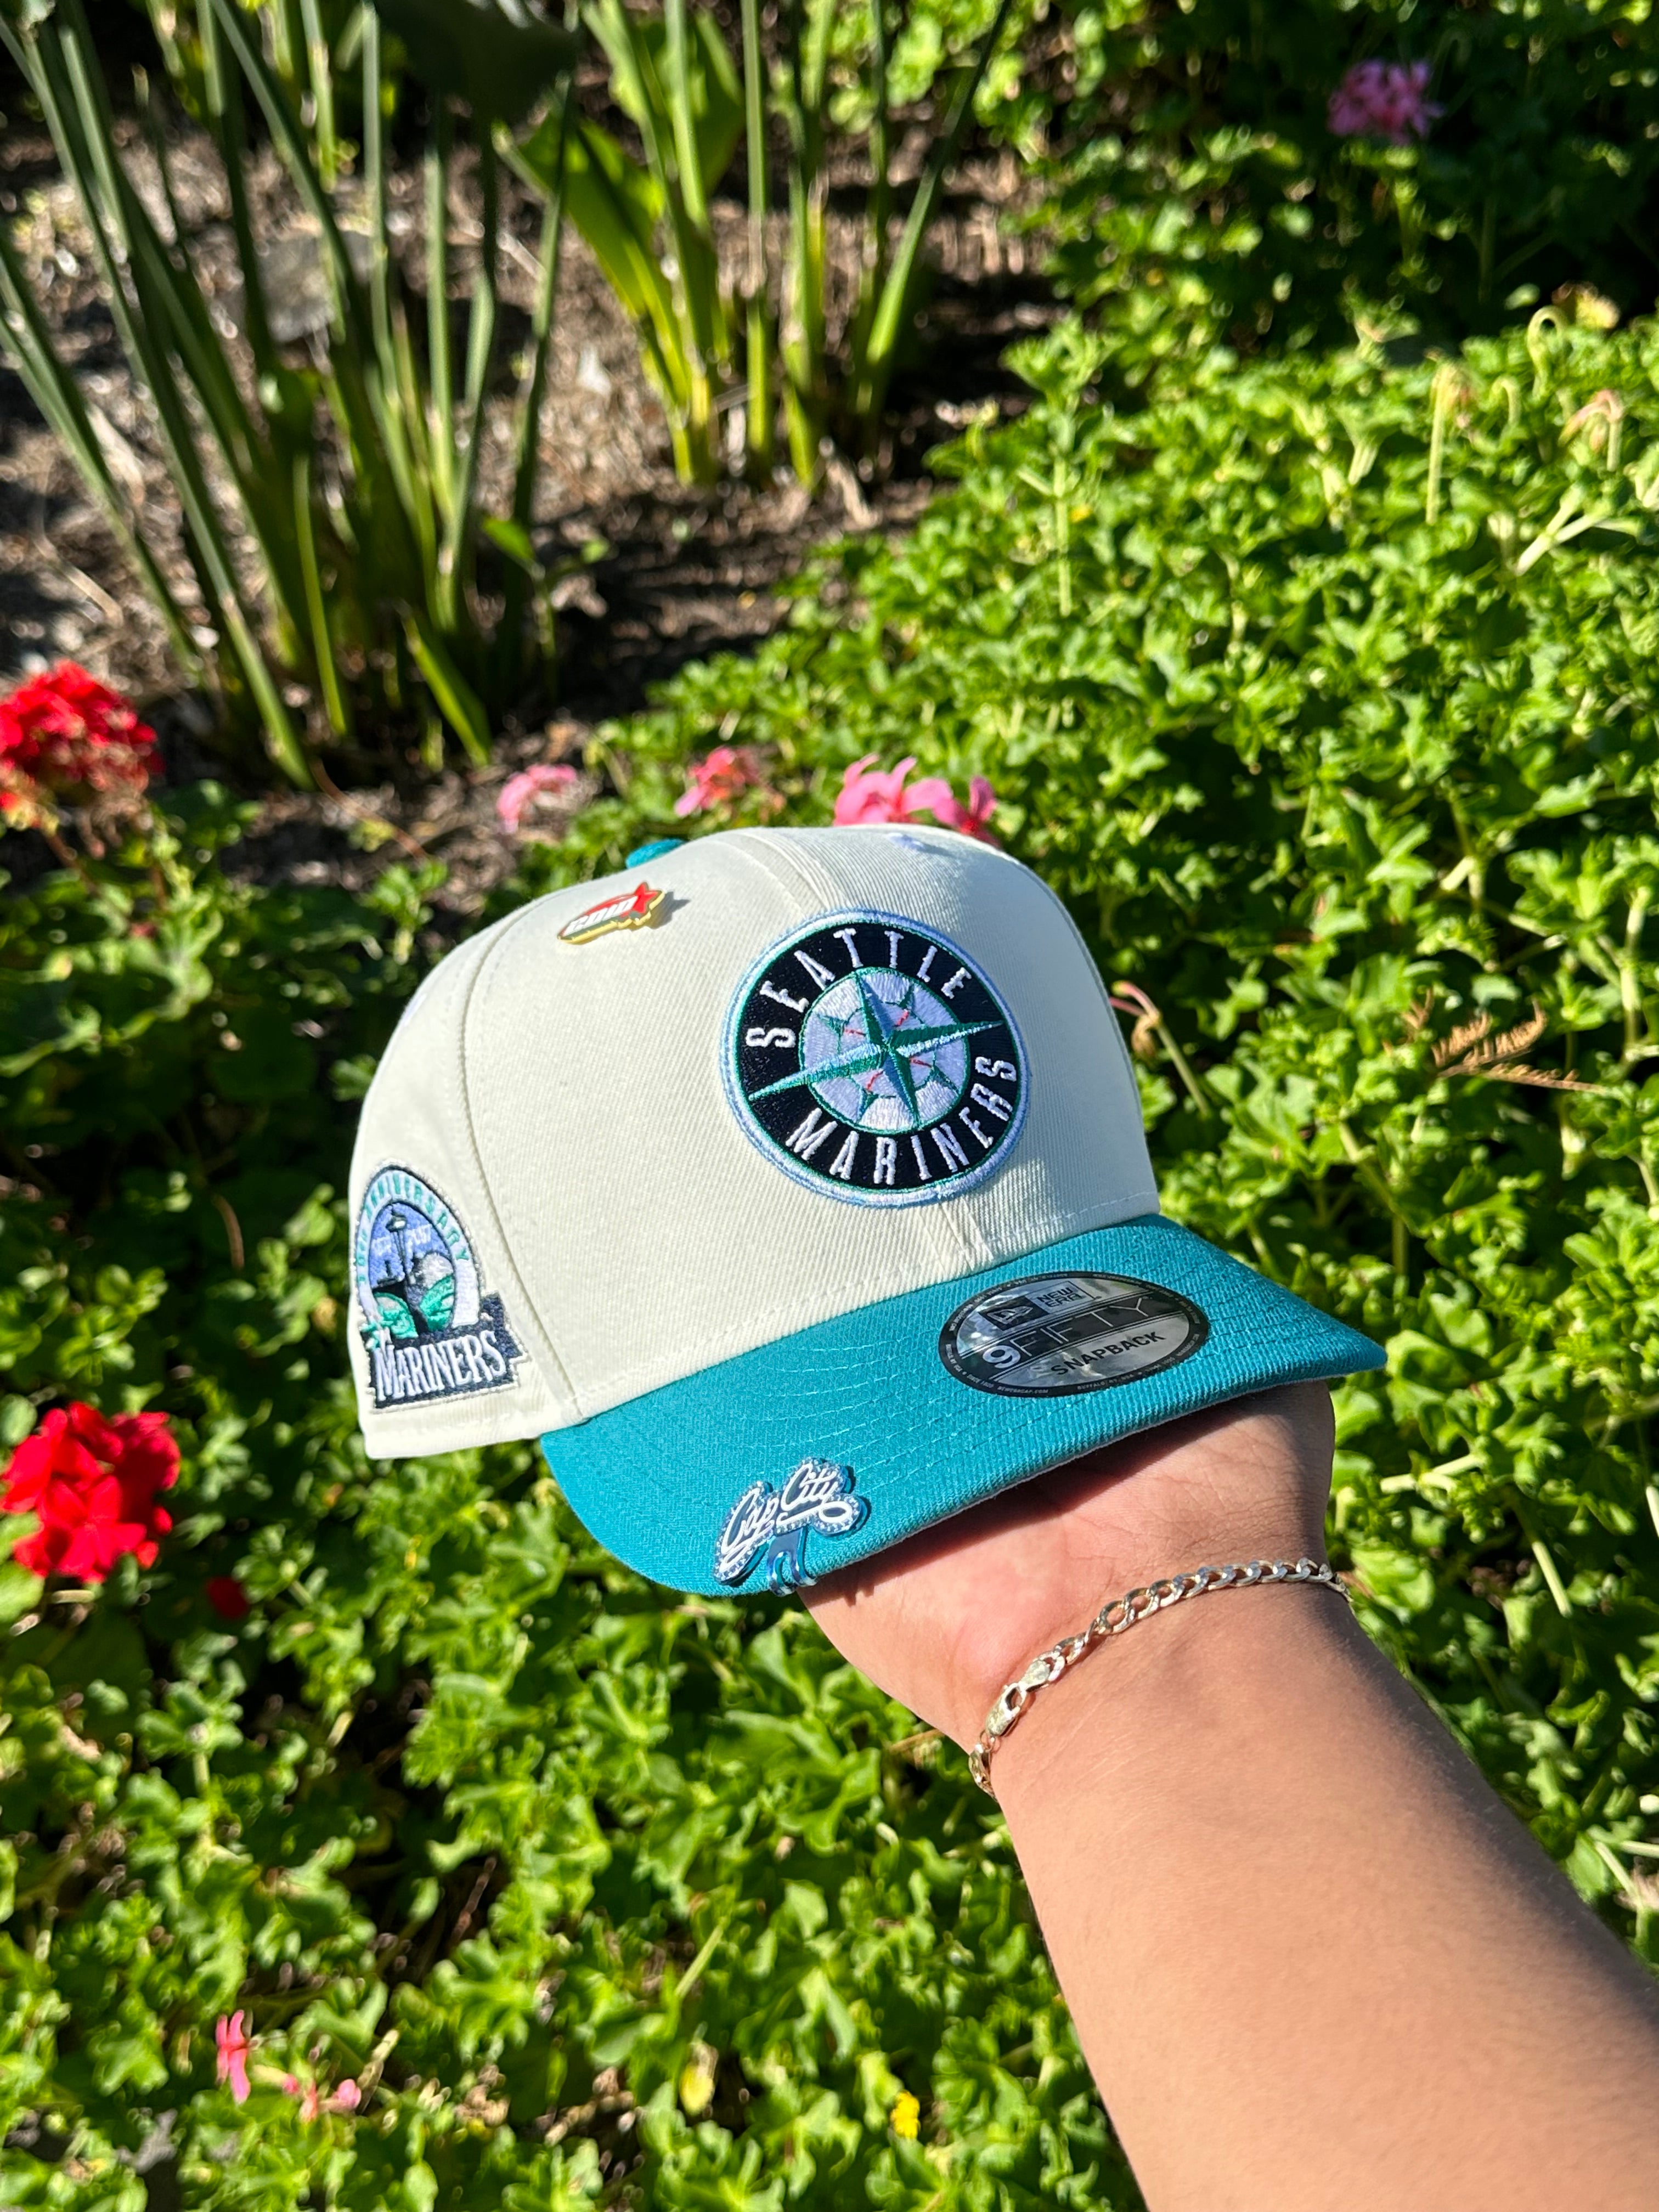 NEW ERA EXCLUSIVE 9FIFTY CHROME WHITE/TURQUOISE SEATTLE MARINERS SNAPBACK W/ 30TH ANNIVERSARY PATCH